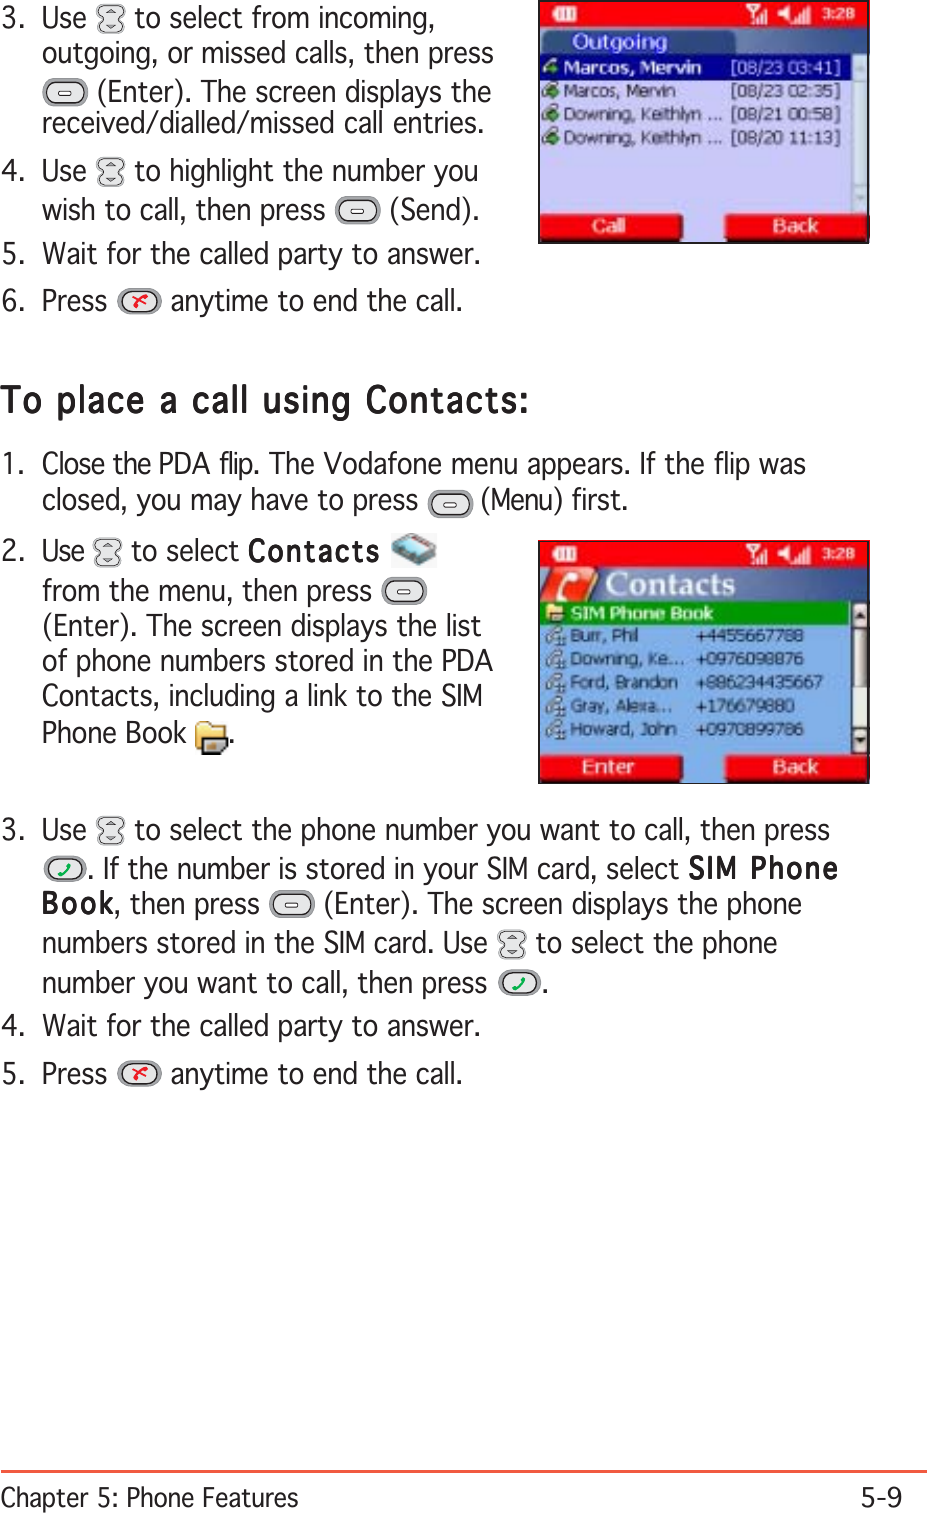 Chapter 5: Phone Features5-9To place a call using Contacts:To place a call using Contacts:To place a call using Contacts:To place a call using Contacts:To place a call using Contacts:1. Close the PDA flip. The Vodafone menu appears. If the flip wasclosed, you may have to press   (Menu) first.2. Use   to select ContactsContactsContactsContactsContactsfrom the menu, then press (Enter). The screen displays the listof phone numbers stored in the PDAContacts, including a link to the SIMPhone Book  .3. Use   to select from incoming,outgoing, or missed calls, then press (Enter). The screen displays thereceived/dialled/missed call entries.4. Use   to highlight the number youwish to call, then press   (Send).5. Wait for the called party to answer.6. Press   anytime to end the call.3. Use   to select the phone number you want to call, then press. If the number is stored in your SIM card, select SIM PhoneSIM PhoneSIM PhoneSIM PhoneSIM PhoneBookBookBookBookBook, then press   (Enter). The screen displays the phonenumbers stored in the SIM card. Use   to select the phonenumber you want to call, then press  .4. Wait for the called party to answer.5. Press   anytime to end the call.